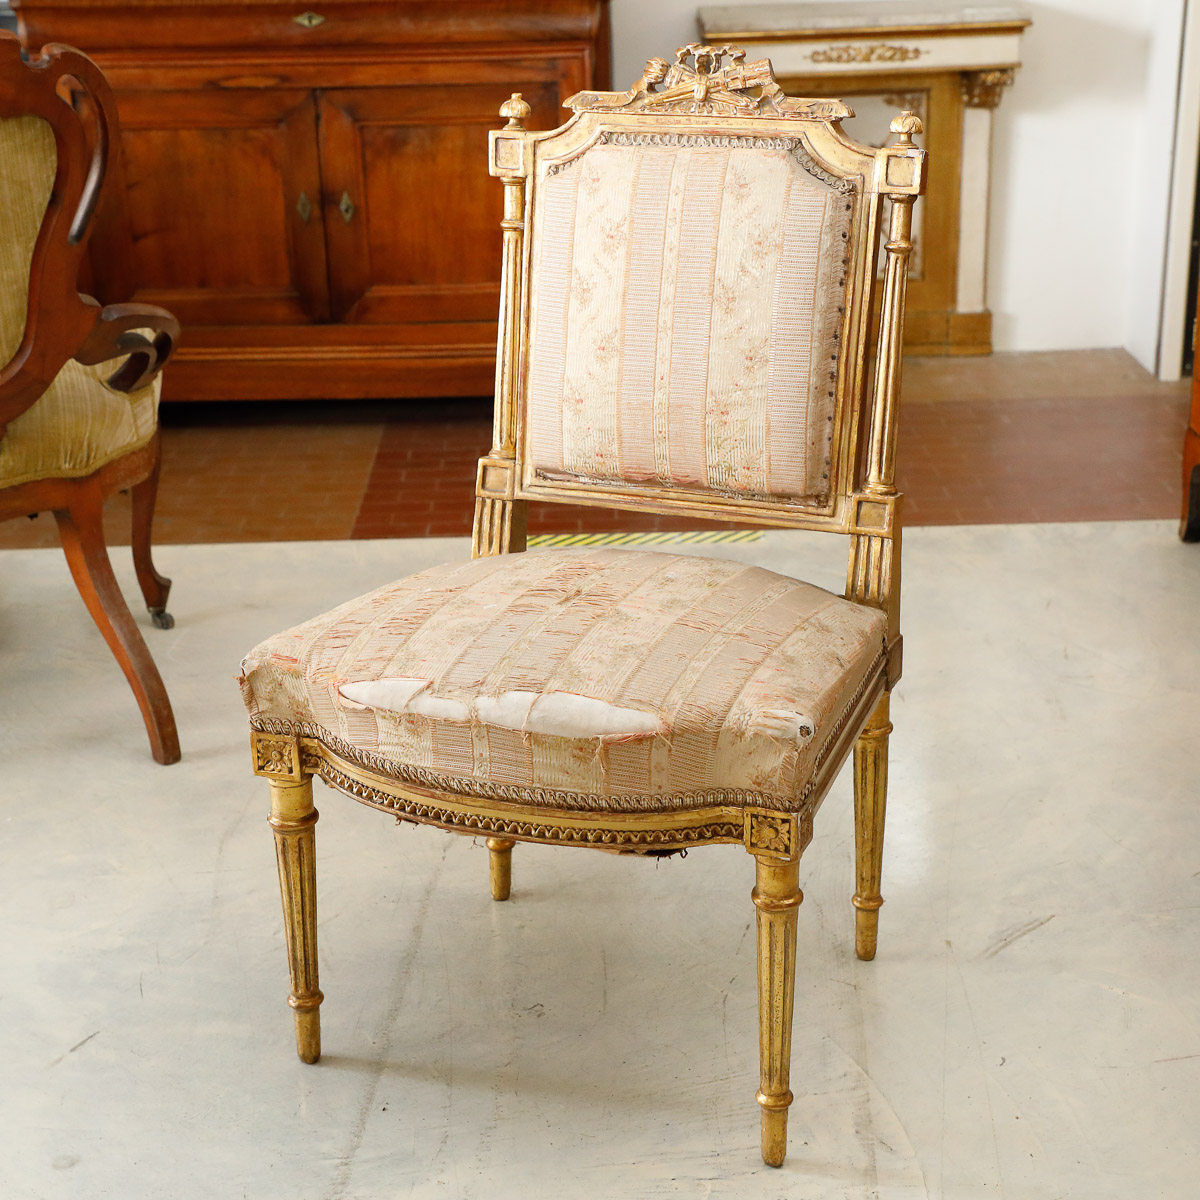 How to Shop for Louis XVI Style Chairs - What Are Louis XVI Chairs